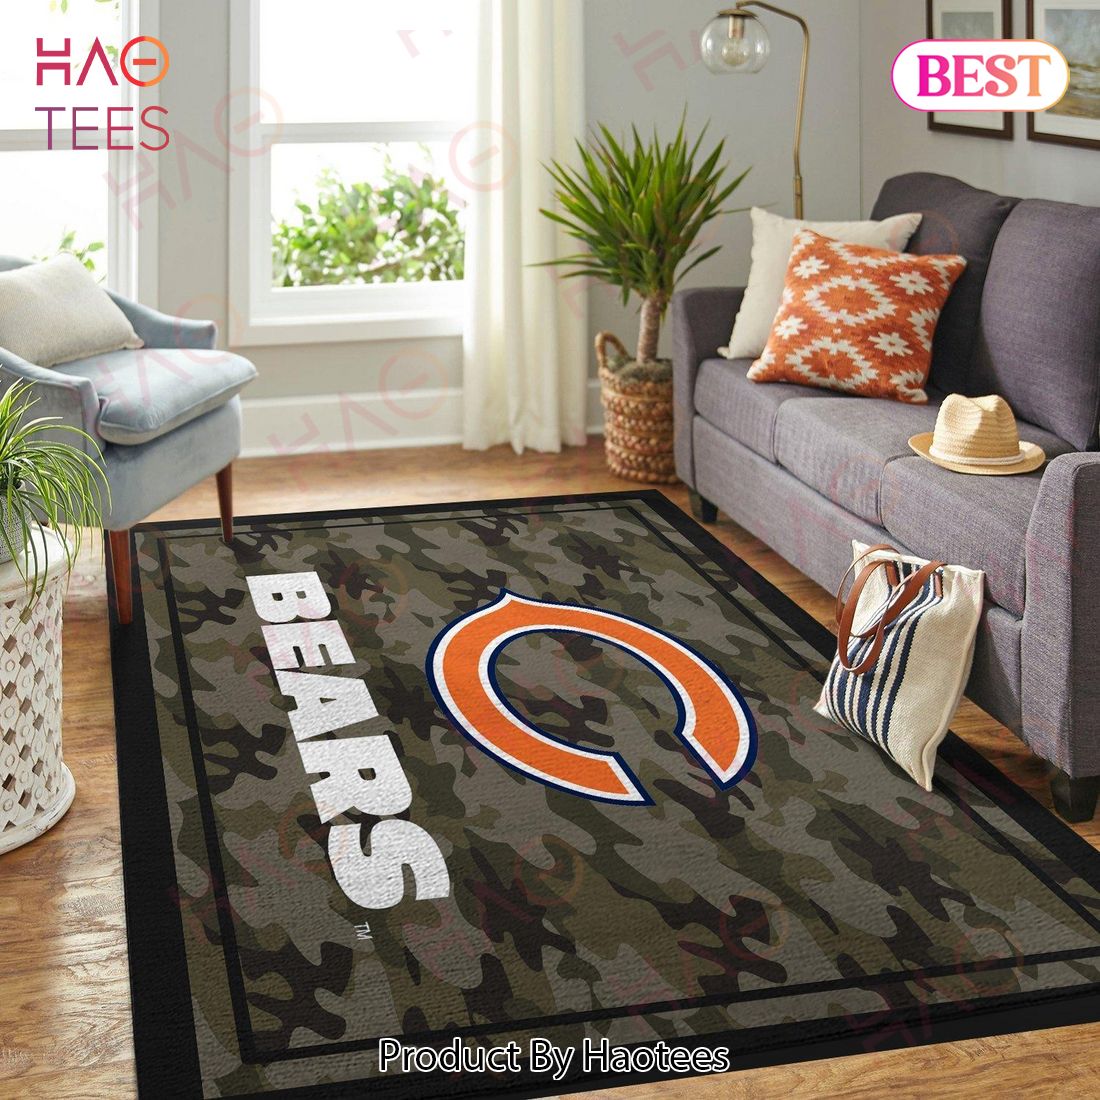 Camo Camouflage Chicago Bears Nfl Limited Edition  Area Rugs Carpet Mat Kitchen Rugs Floor Decor